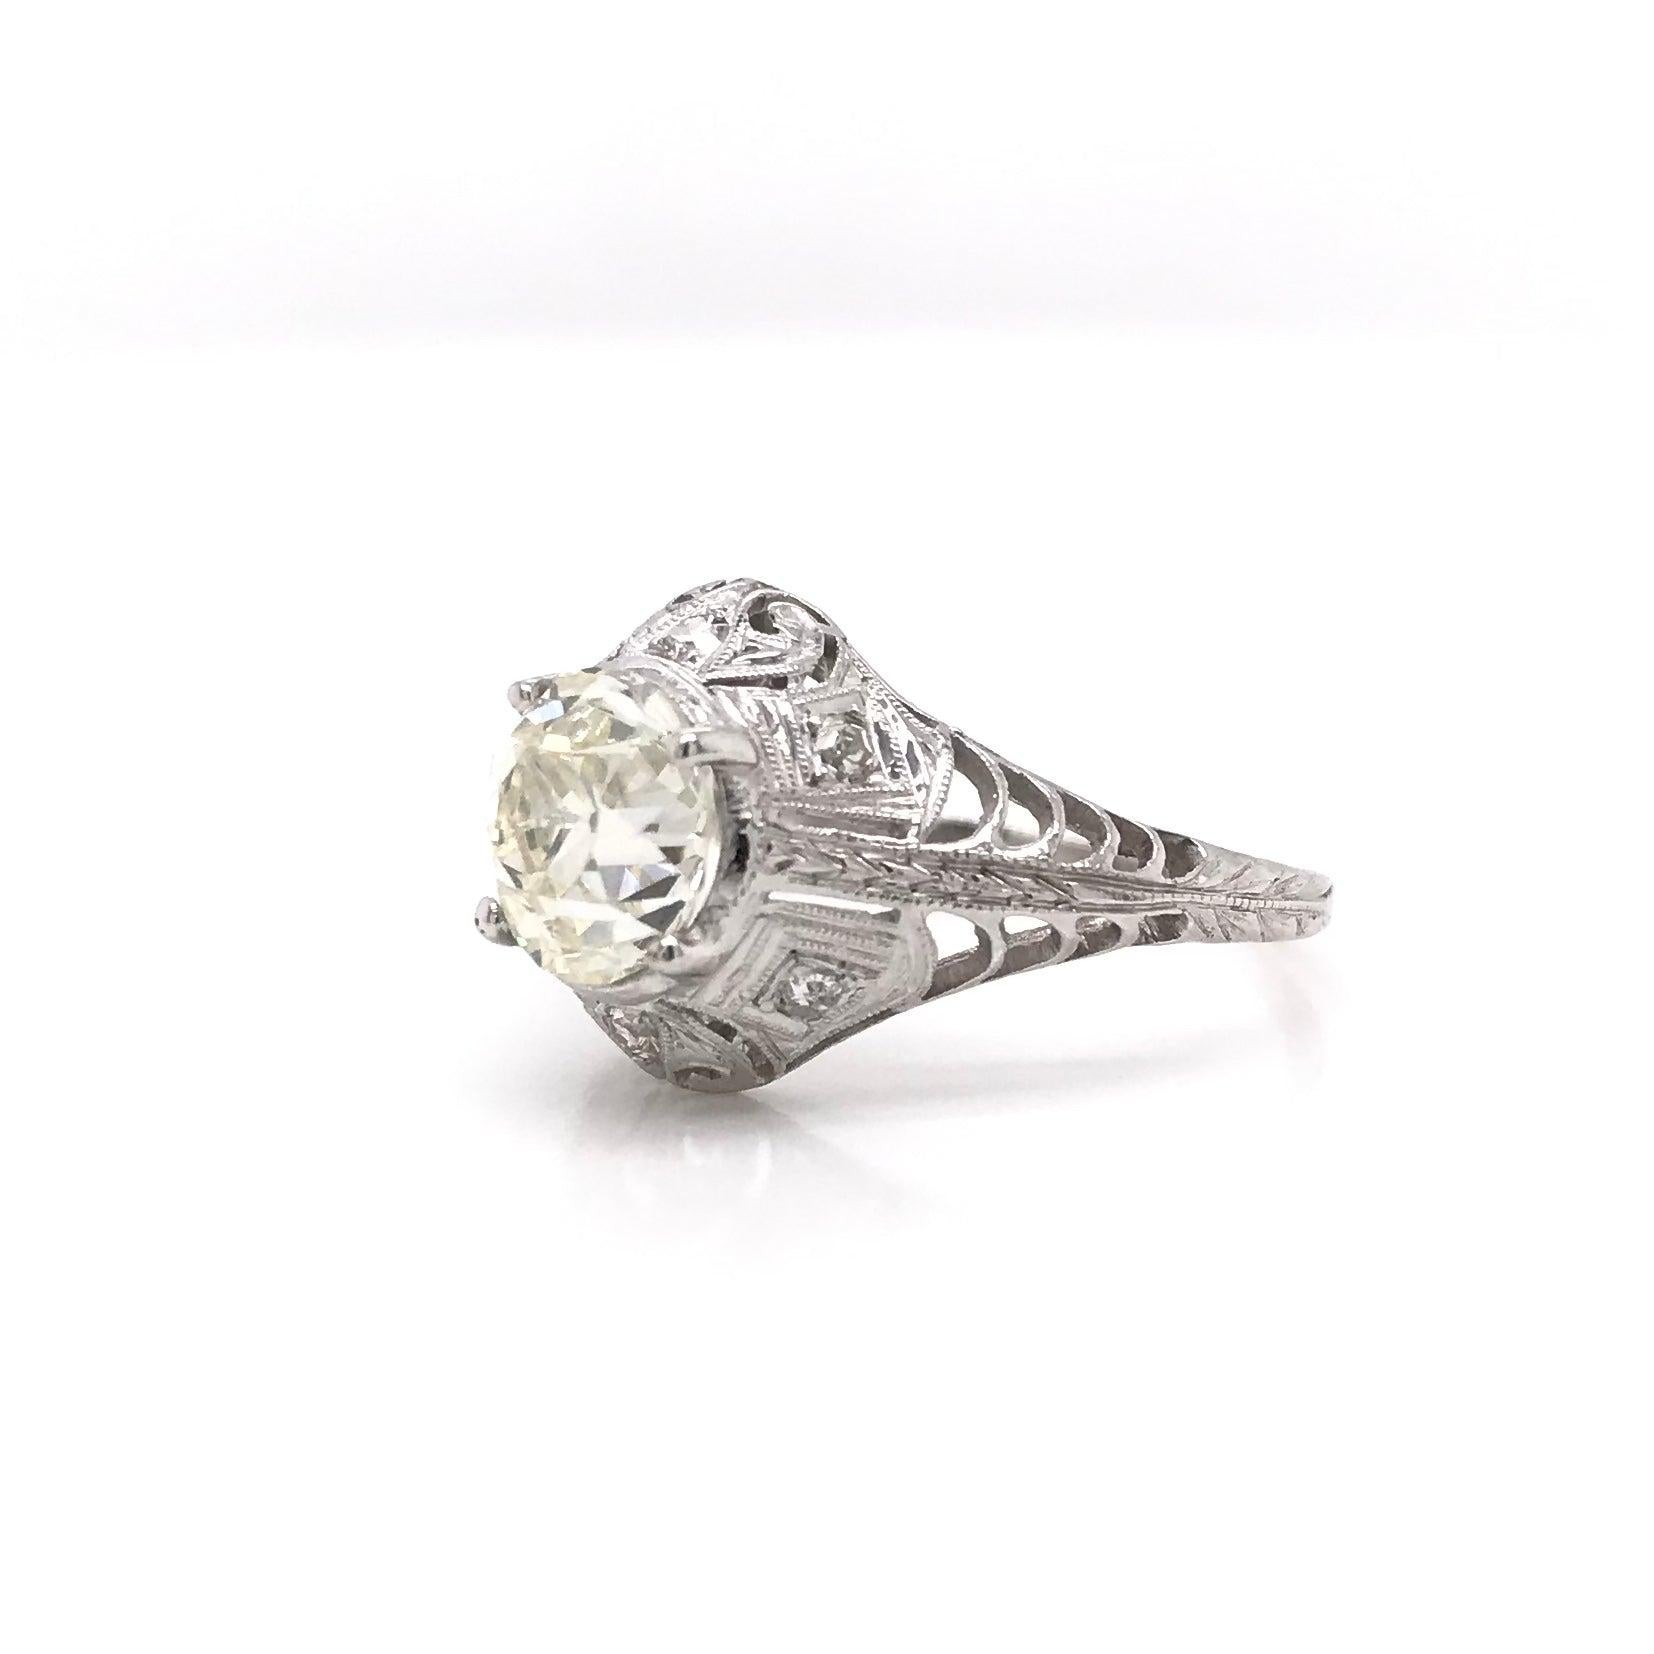 This gorgeous antique piece was handcrafted sometime during the Edwardian design period ( 1900-1920 ). The setting is platinum and features a beautiful center diamond measuring approximately 1.50 carats. The center diamond is an old European cut and